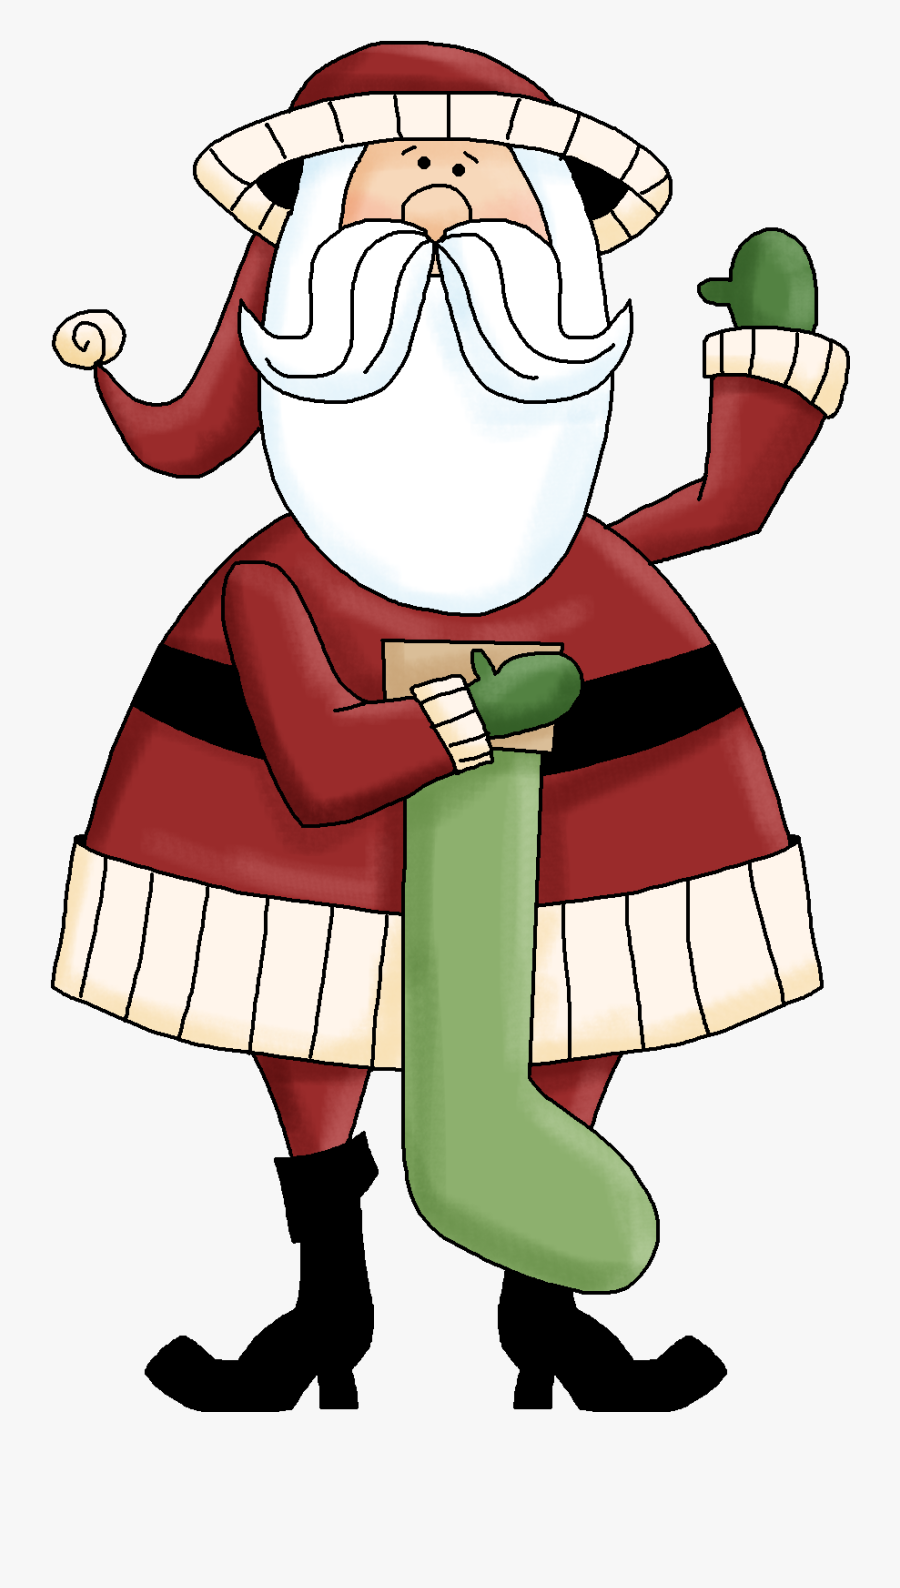 We *finally* Finished For The Holidays This Past Friday - Survey Secret Santa Forms, Transparent Clipart